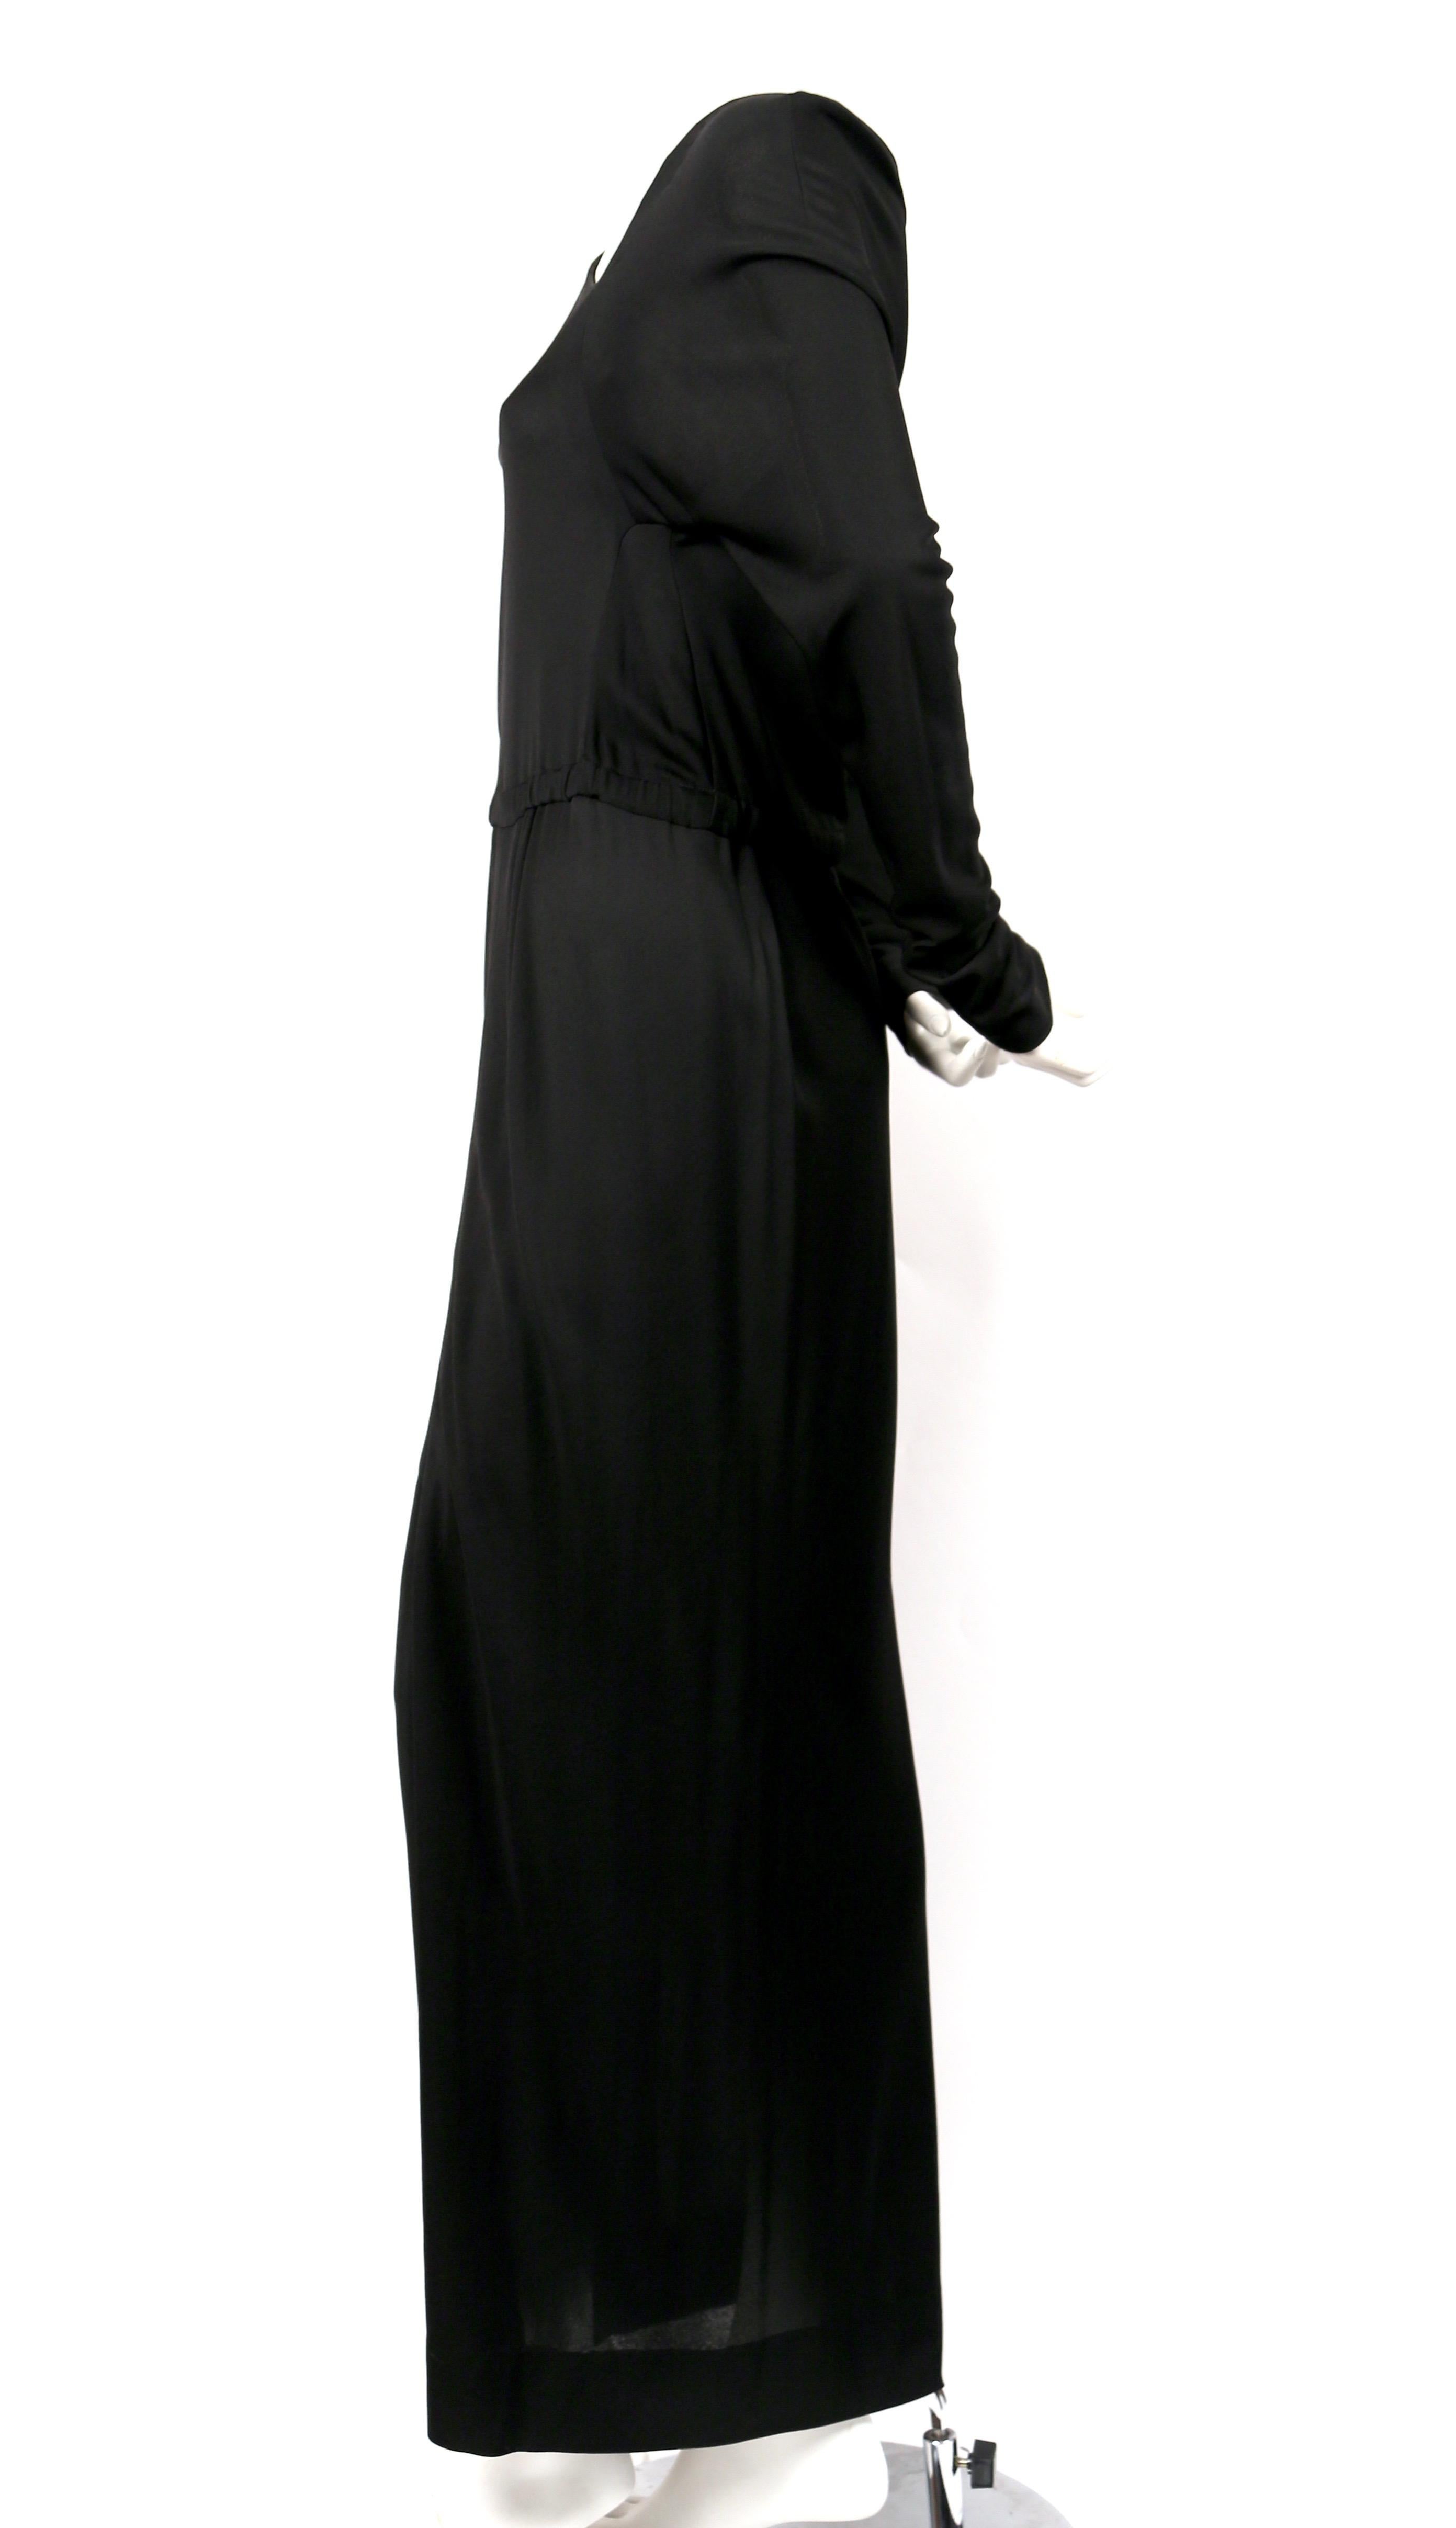 Jet-black, silk jersey gown with asymmetrical cut designed by Halston dating to the 1970's. No size is indicated however this would best fit a US 4-6. Approximate measurements: bust 33-34